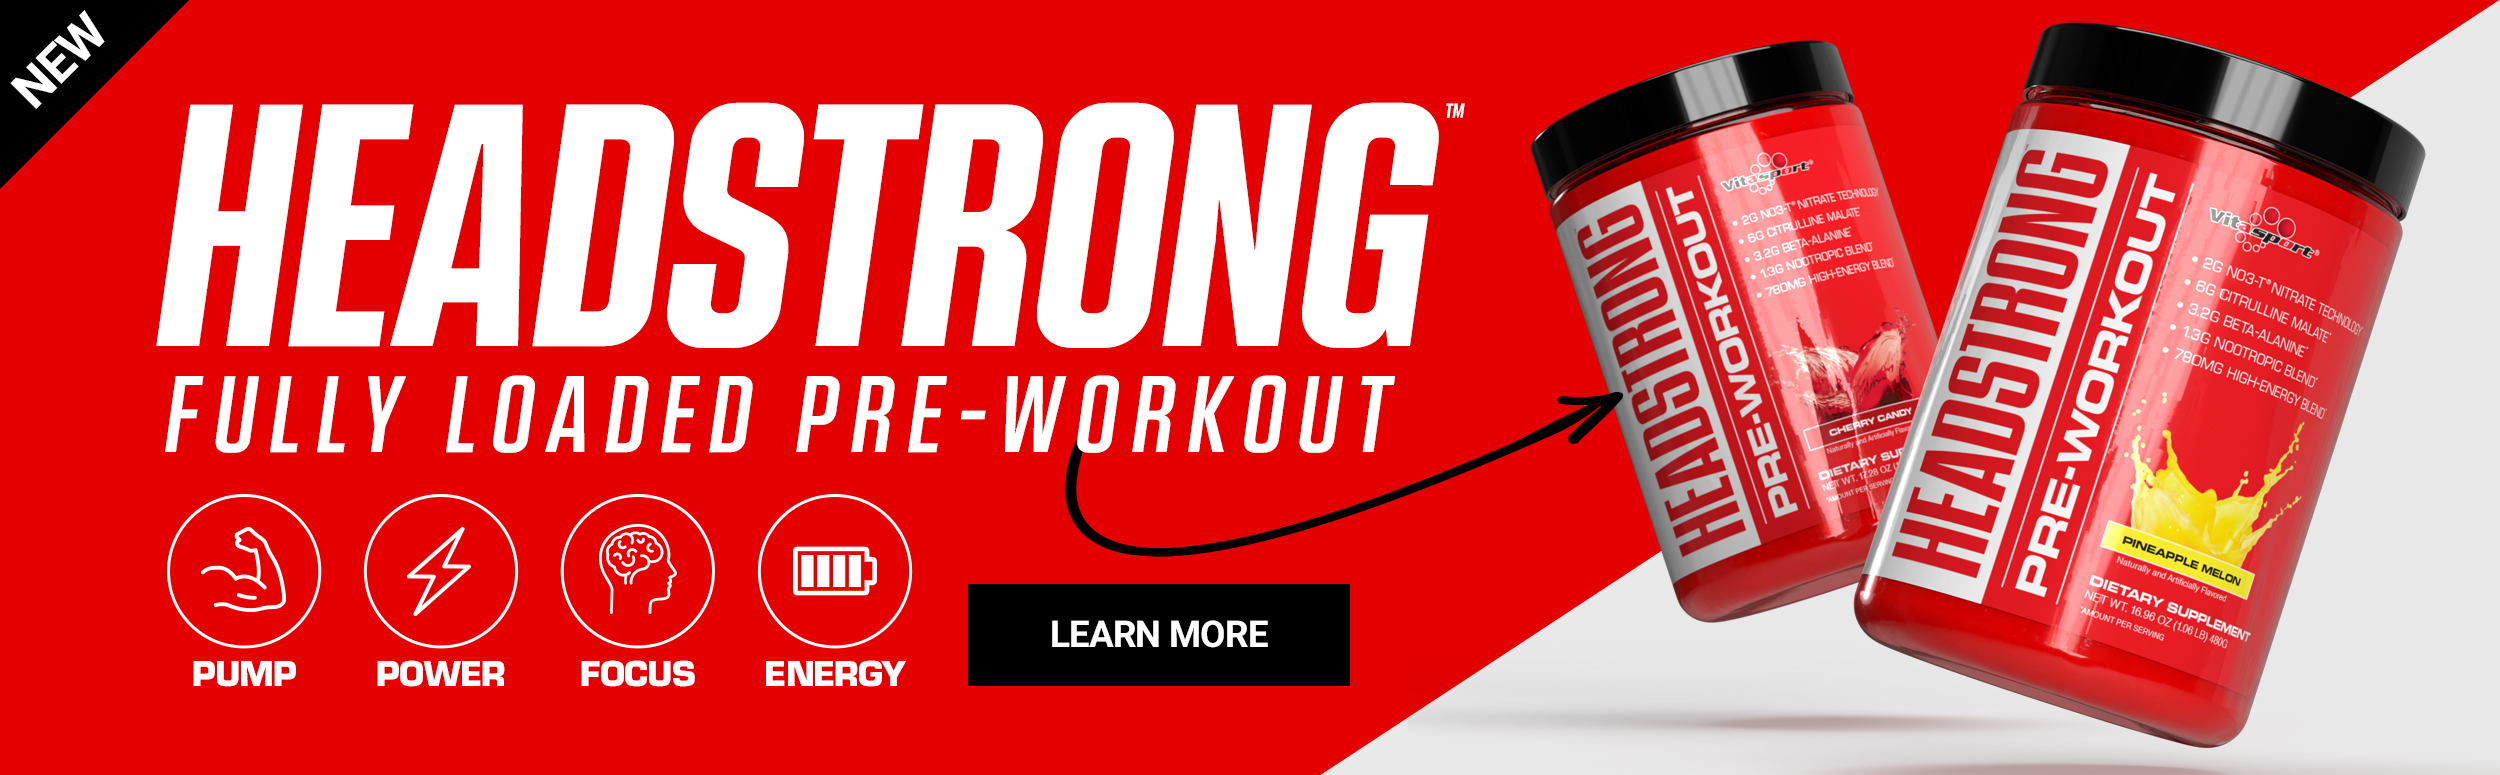 Vitasport Headstrong - Fully Loaded Pre-workout - Click to learn more